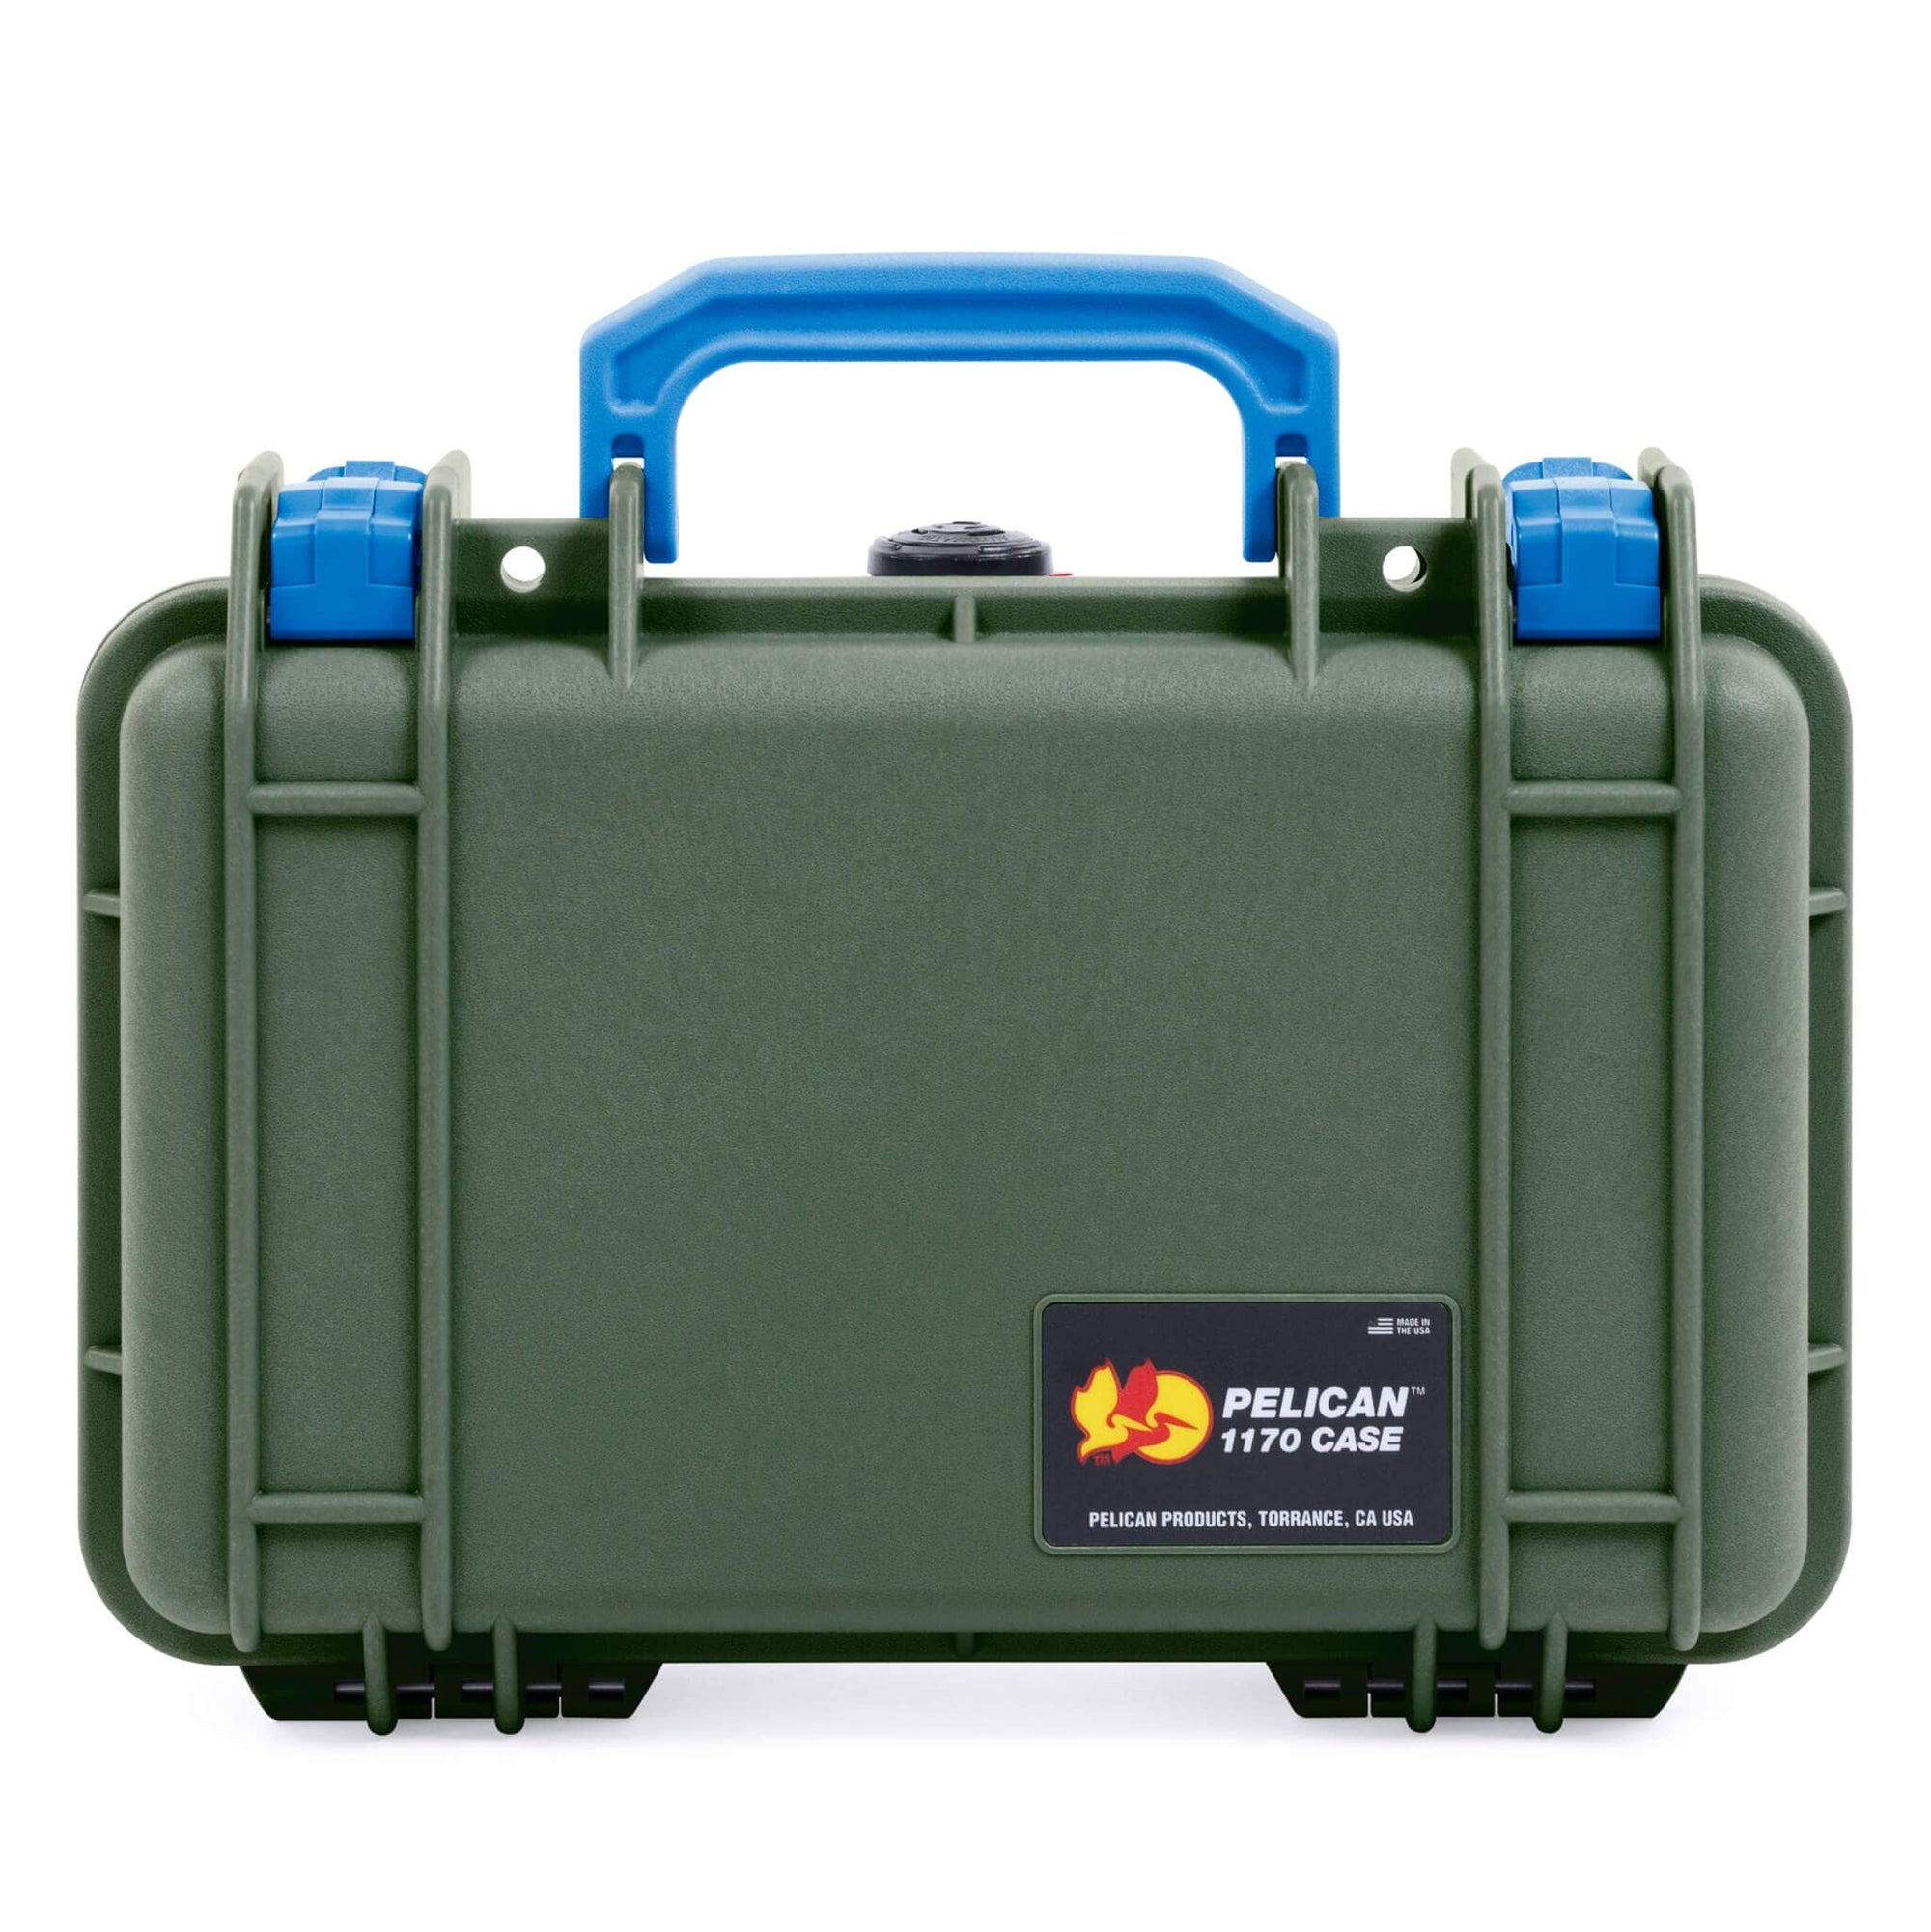 Pelican 1170 Case, OD Green with Blue Handle & Latches ColorCase 